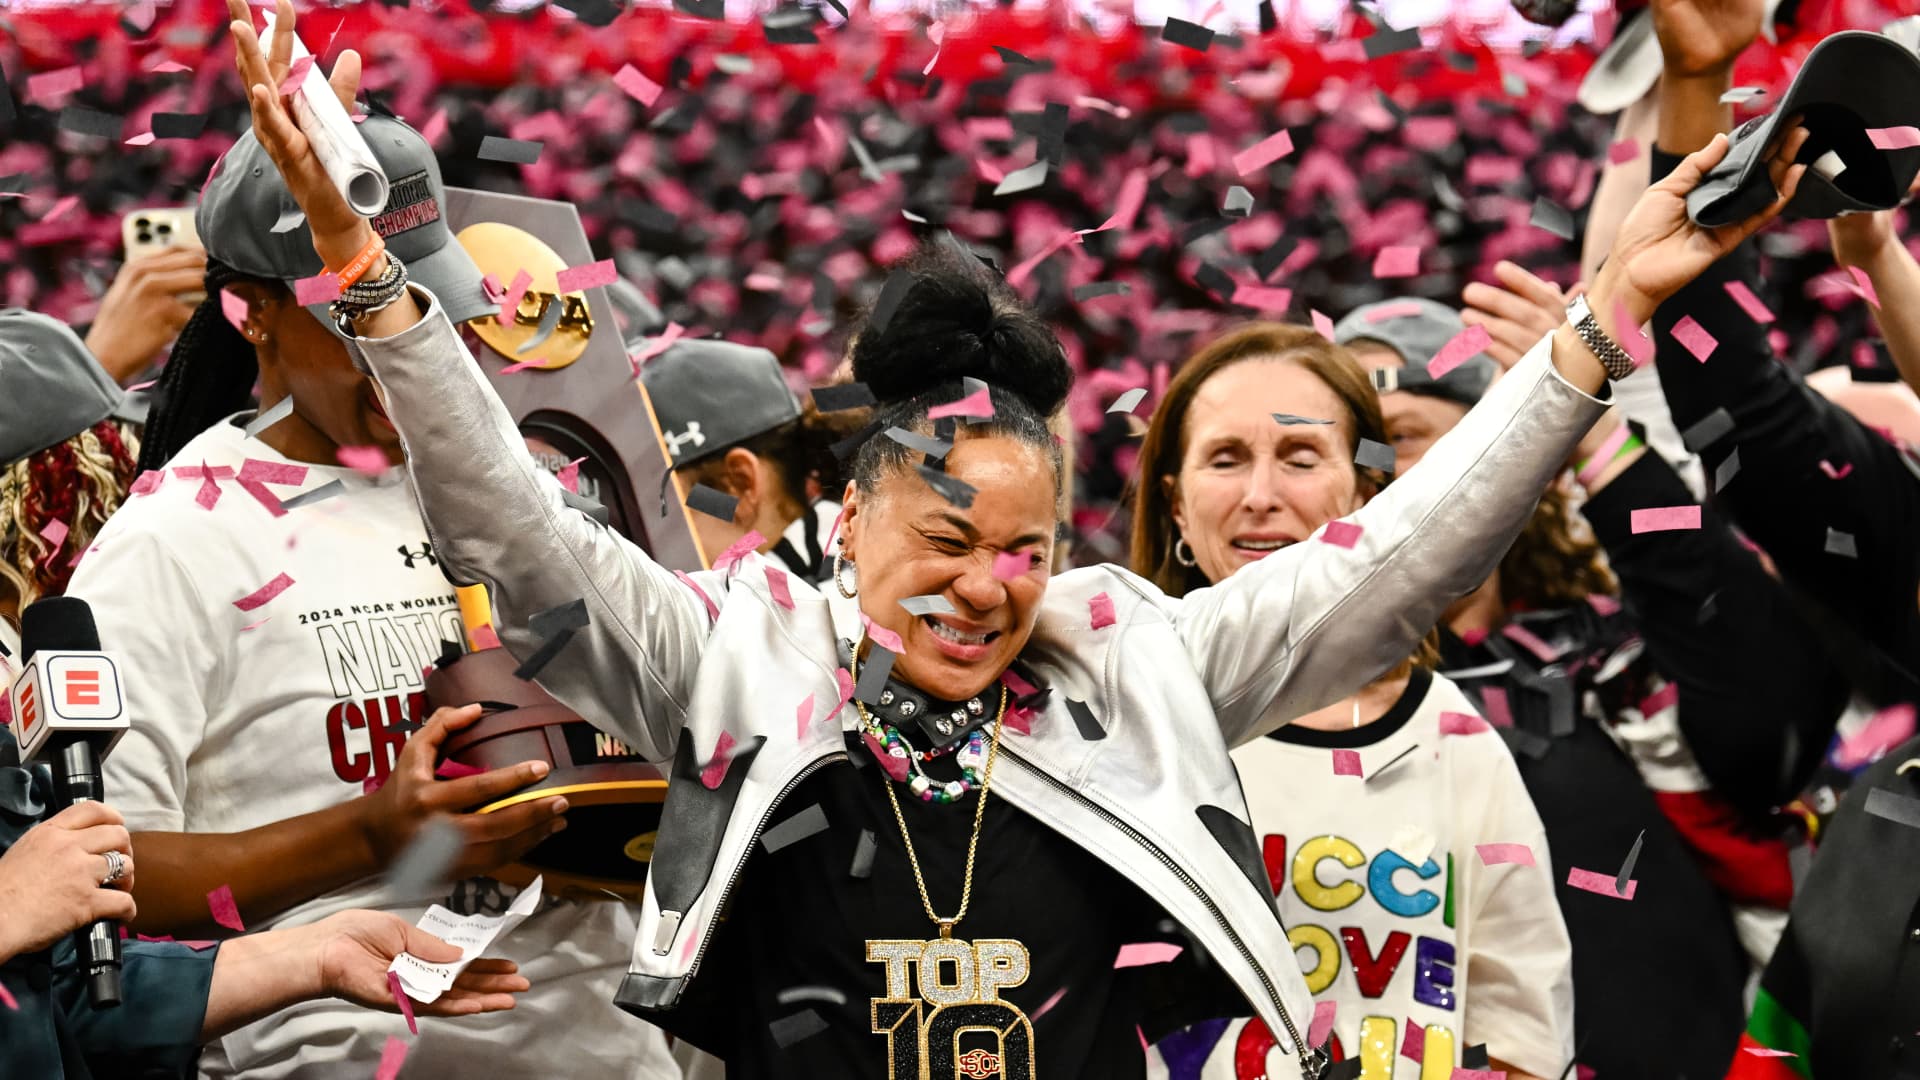 South Carolina coach Dawn Staley calls for women’s sports investment